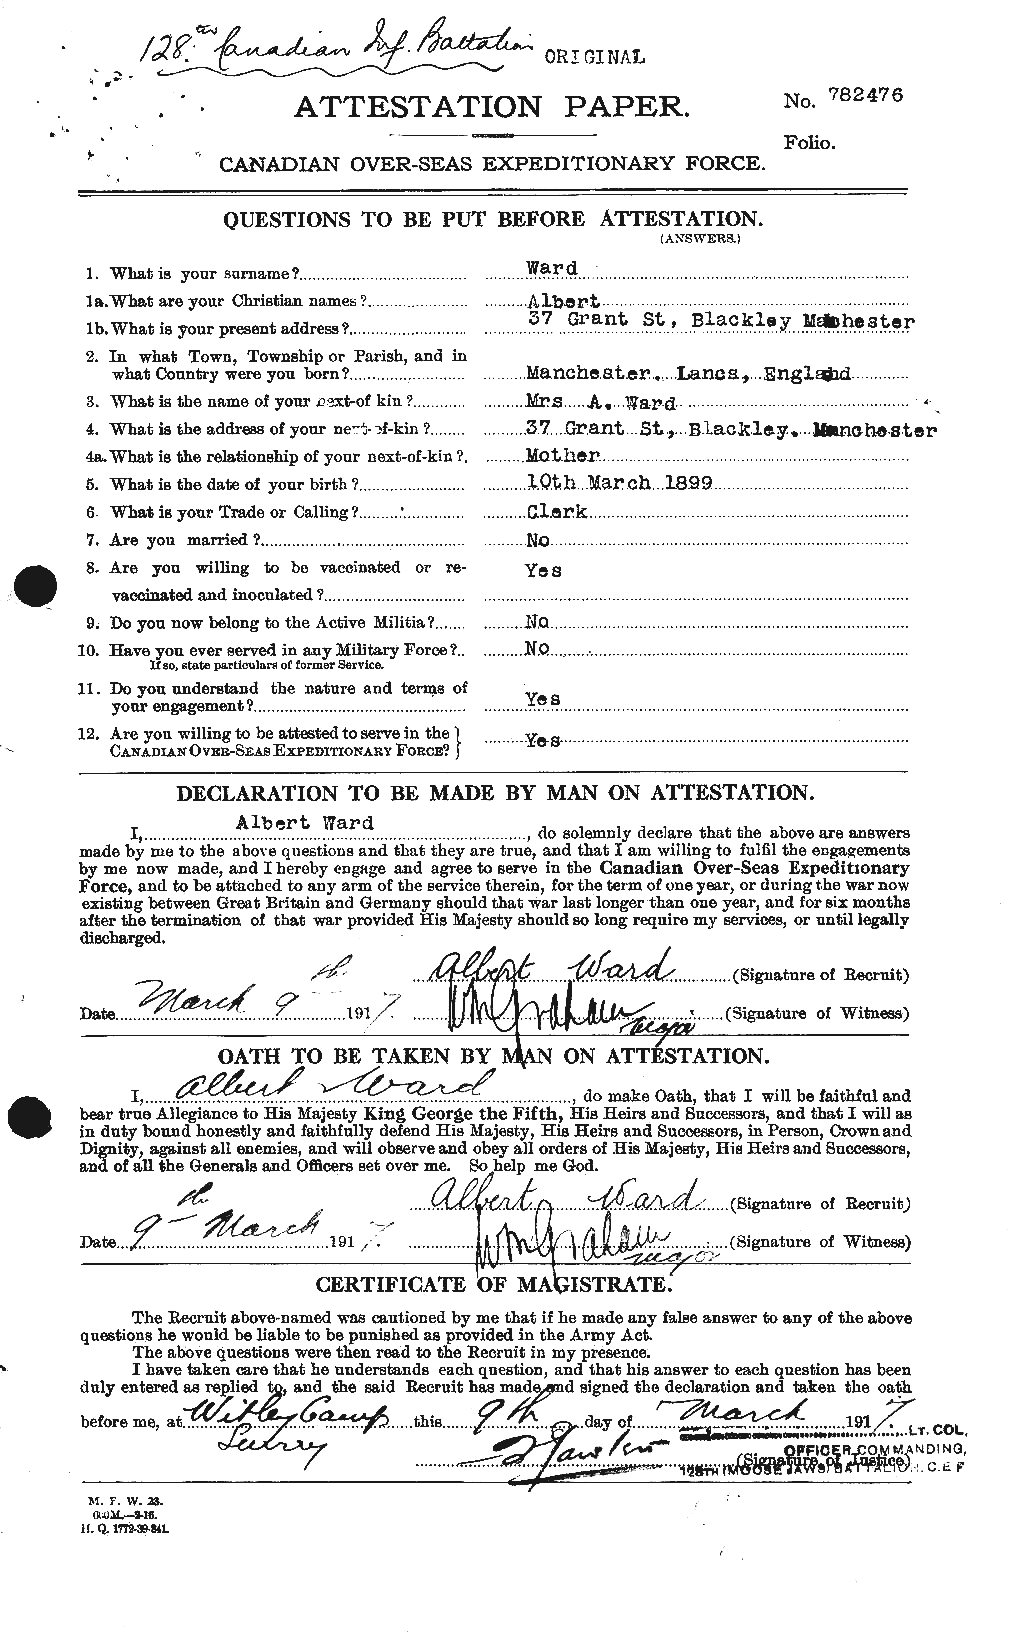 Personnel Records of the First World War - CEF 655083a